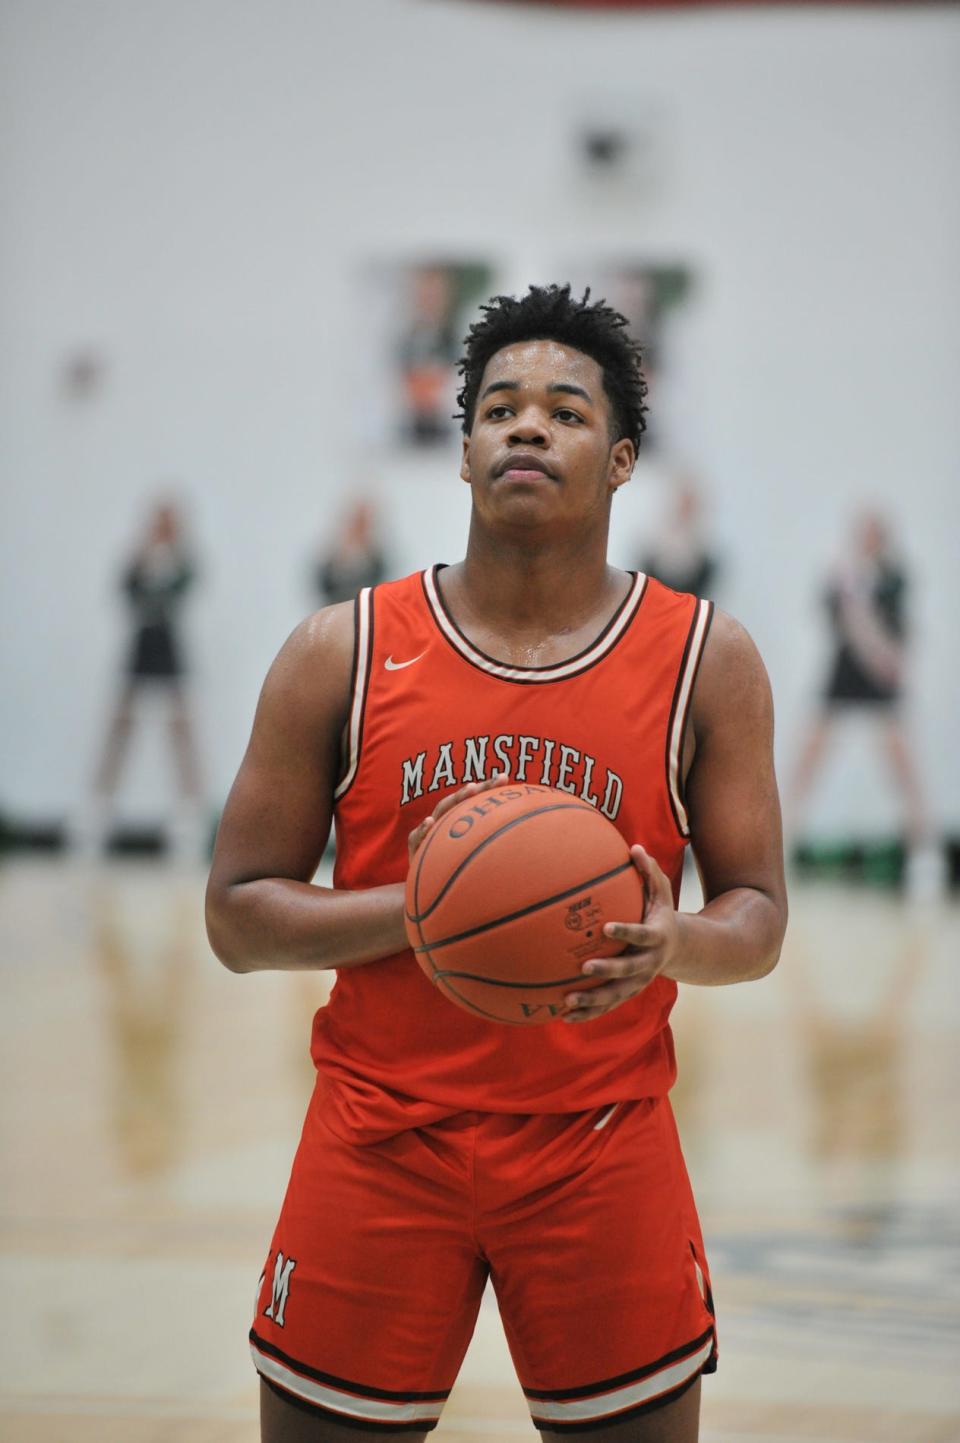 Mansfield Senior's Kyevi Roane was named first team All-Mansfield News Journal for the 2022-23 season.